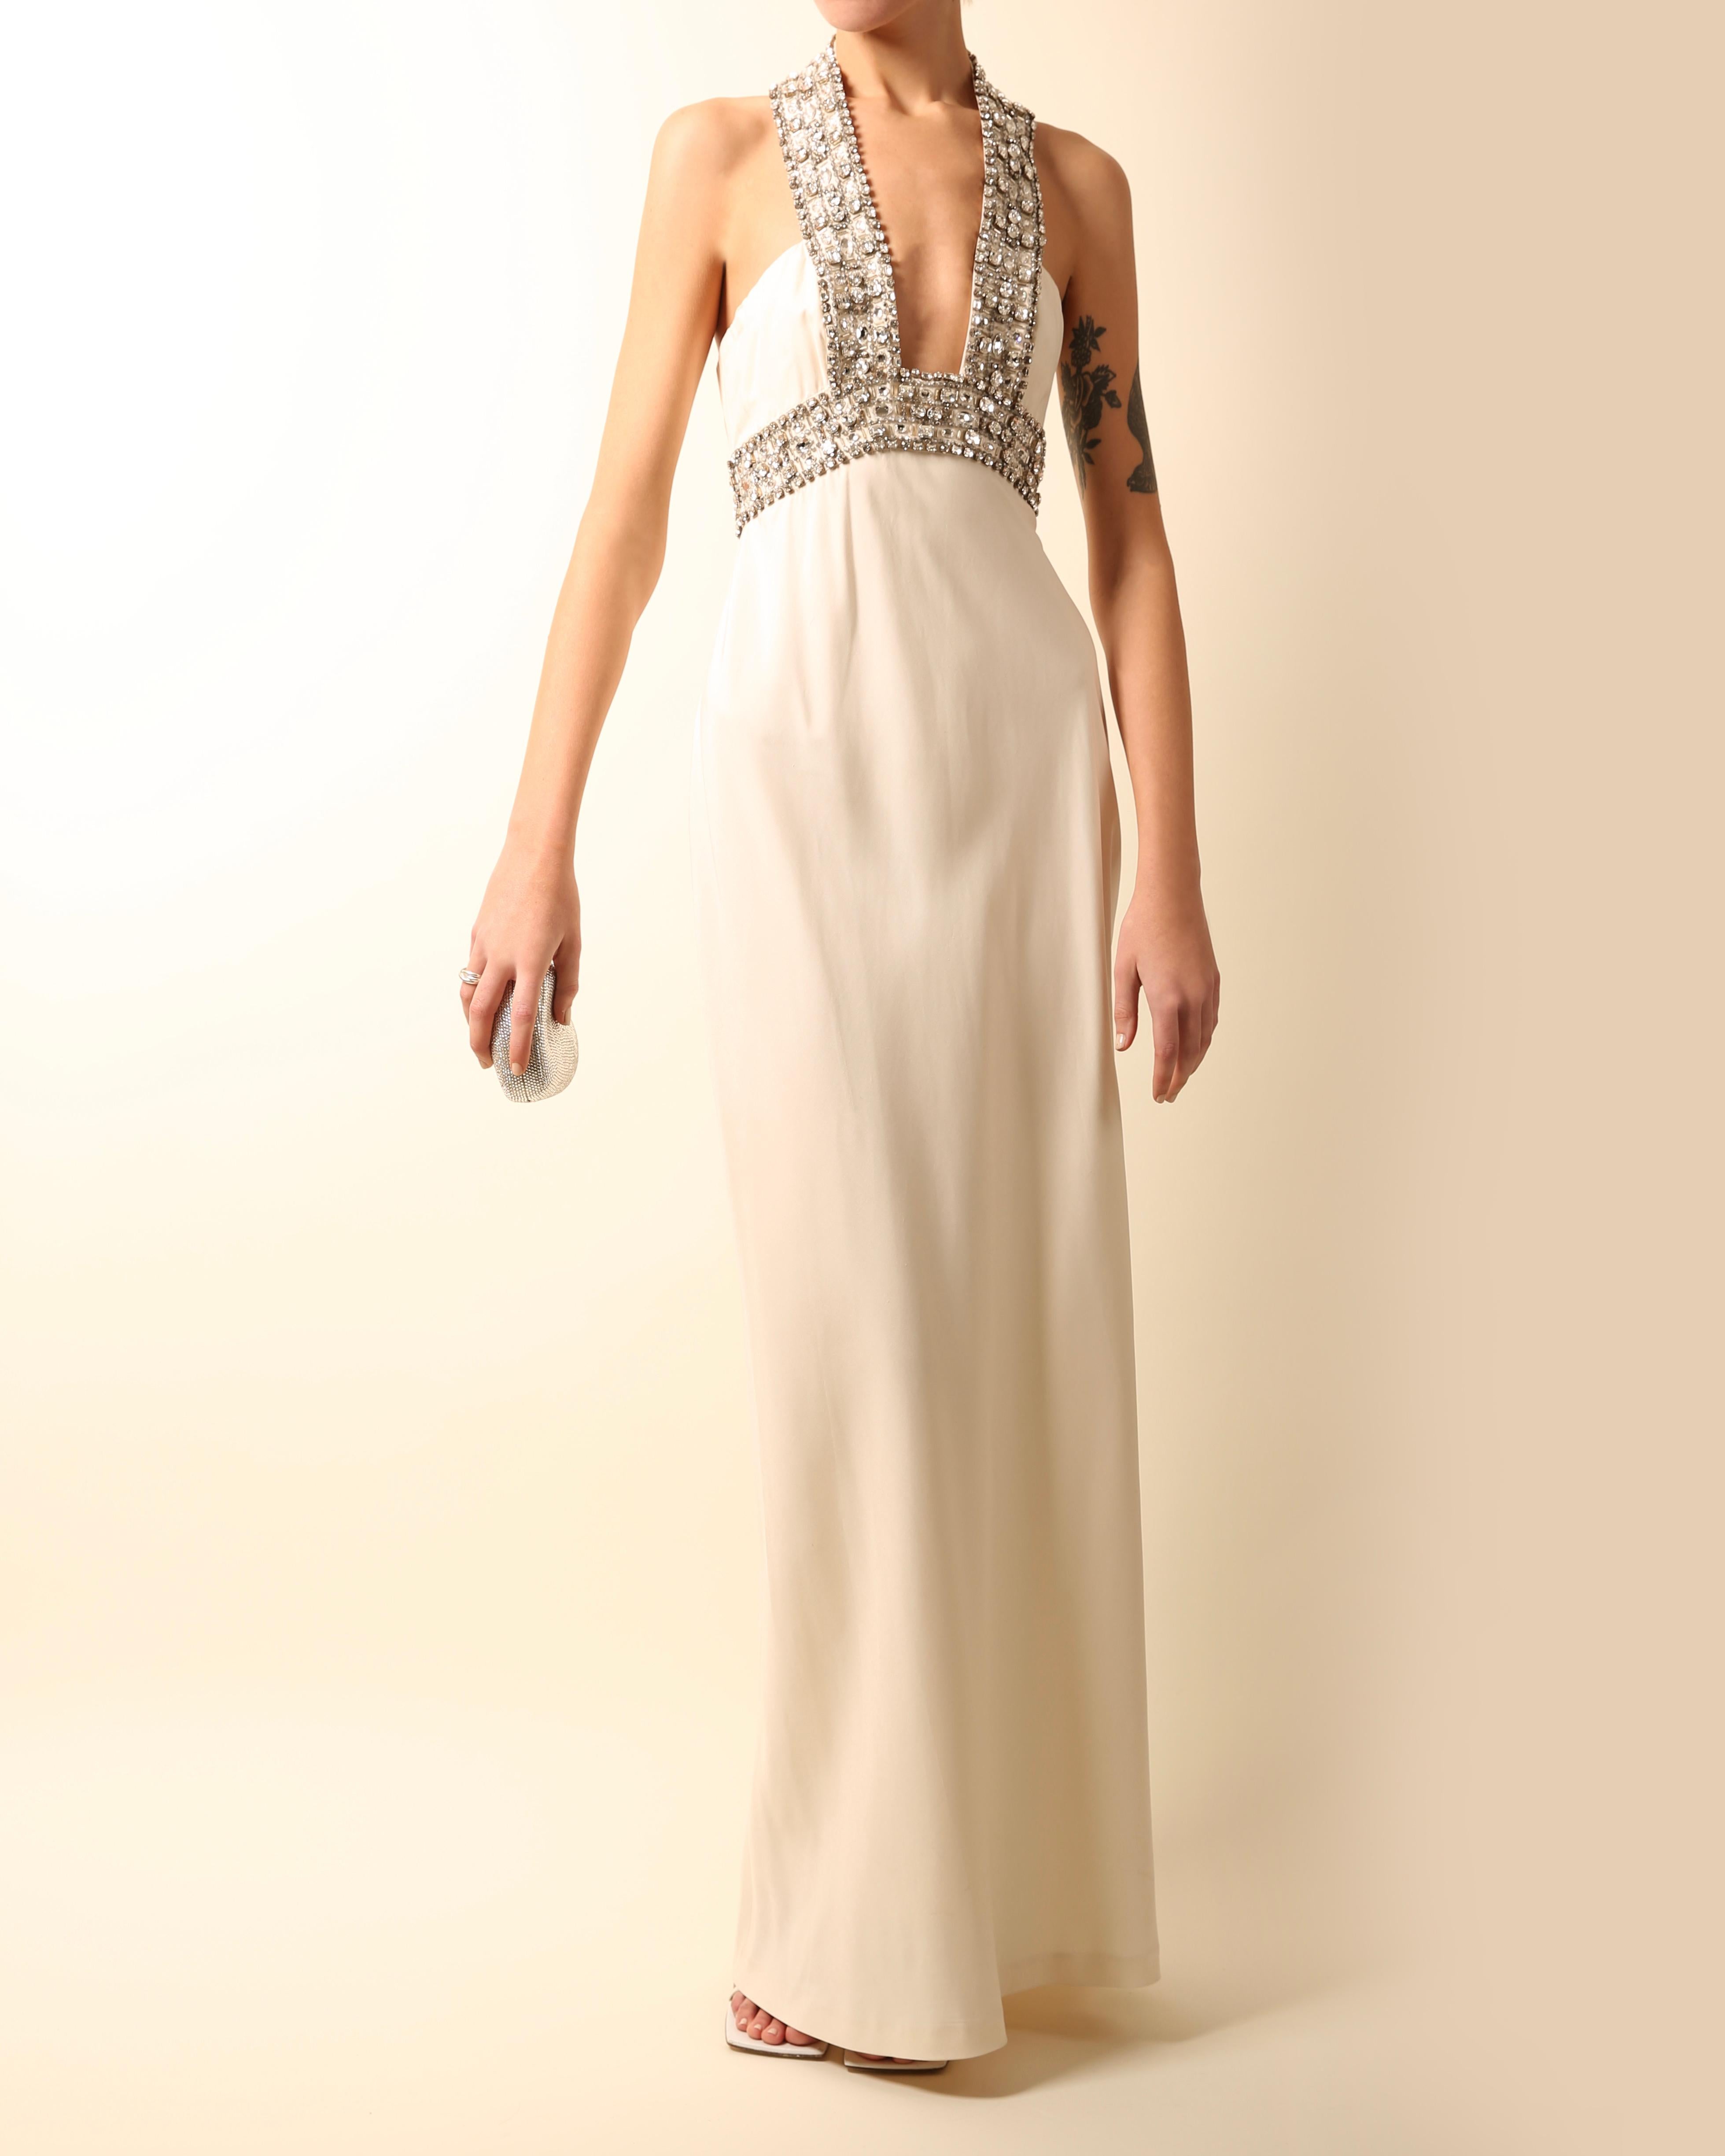 embellished white gown